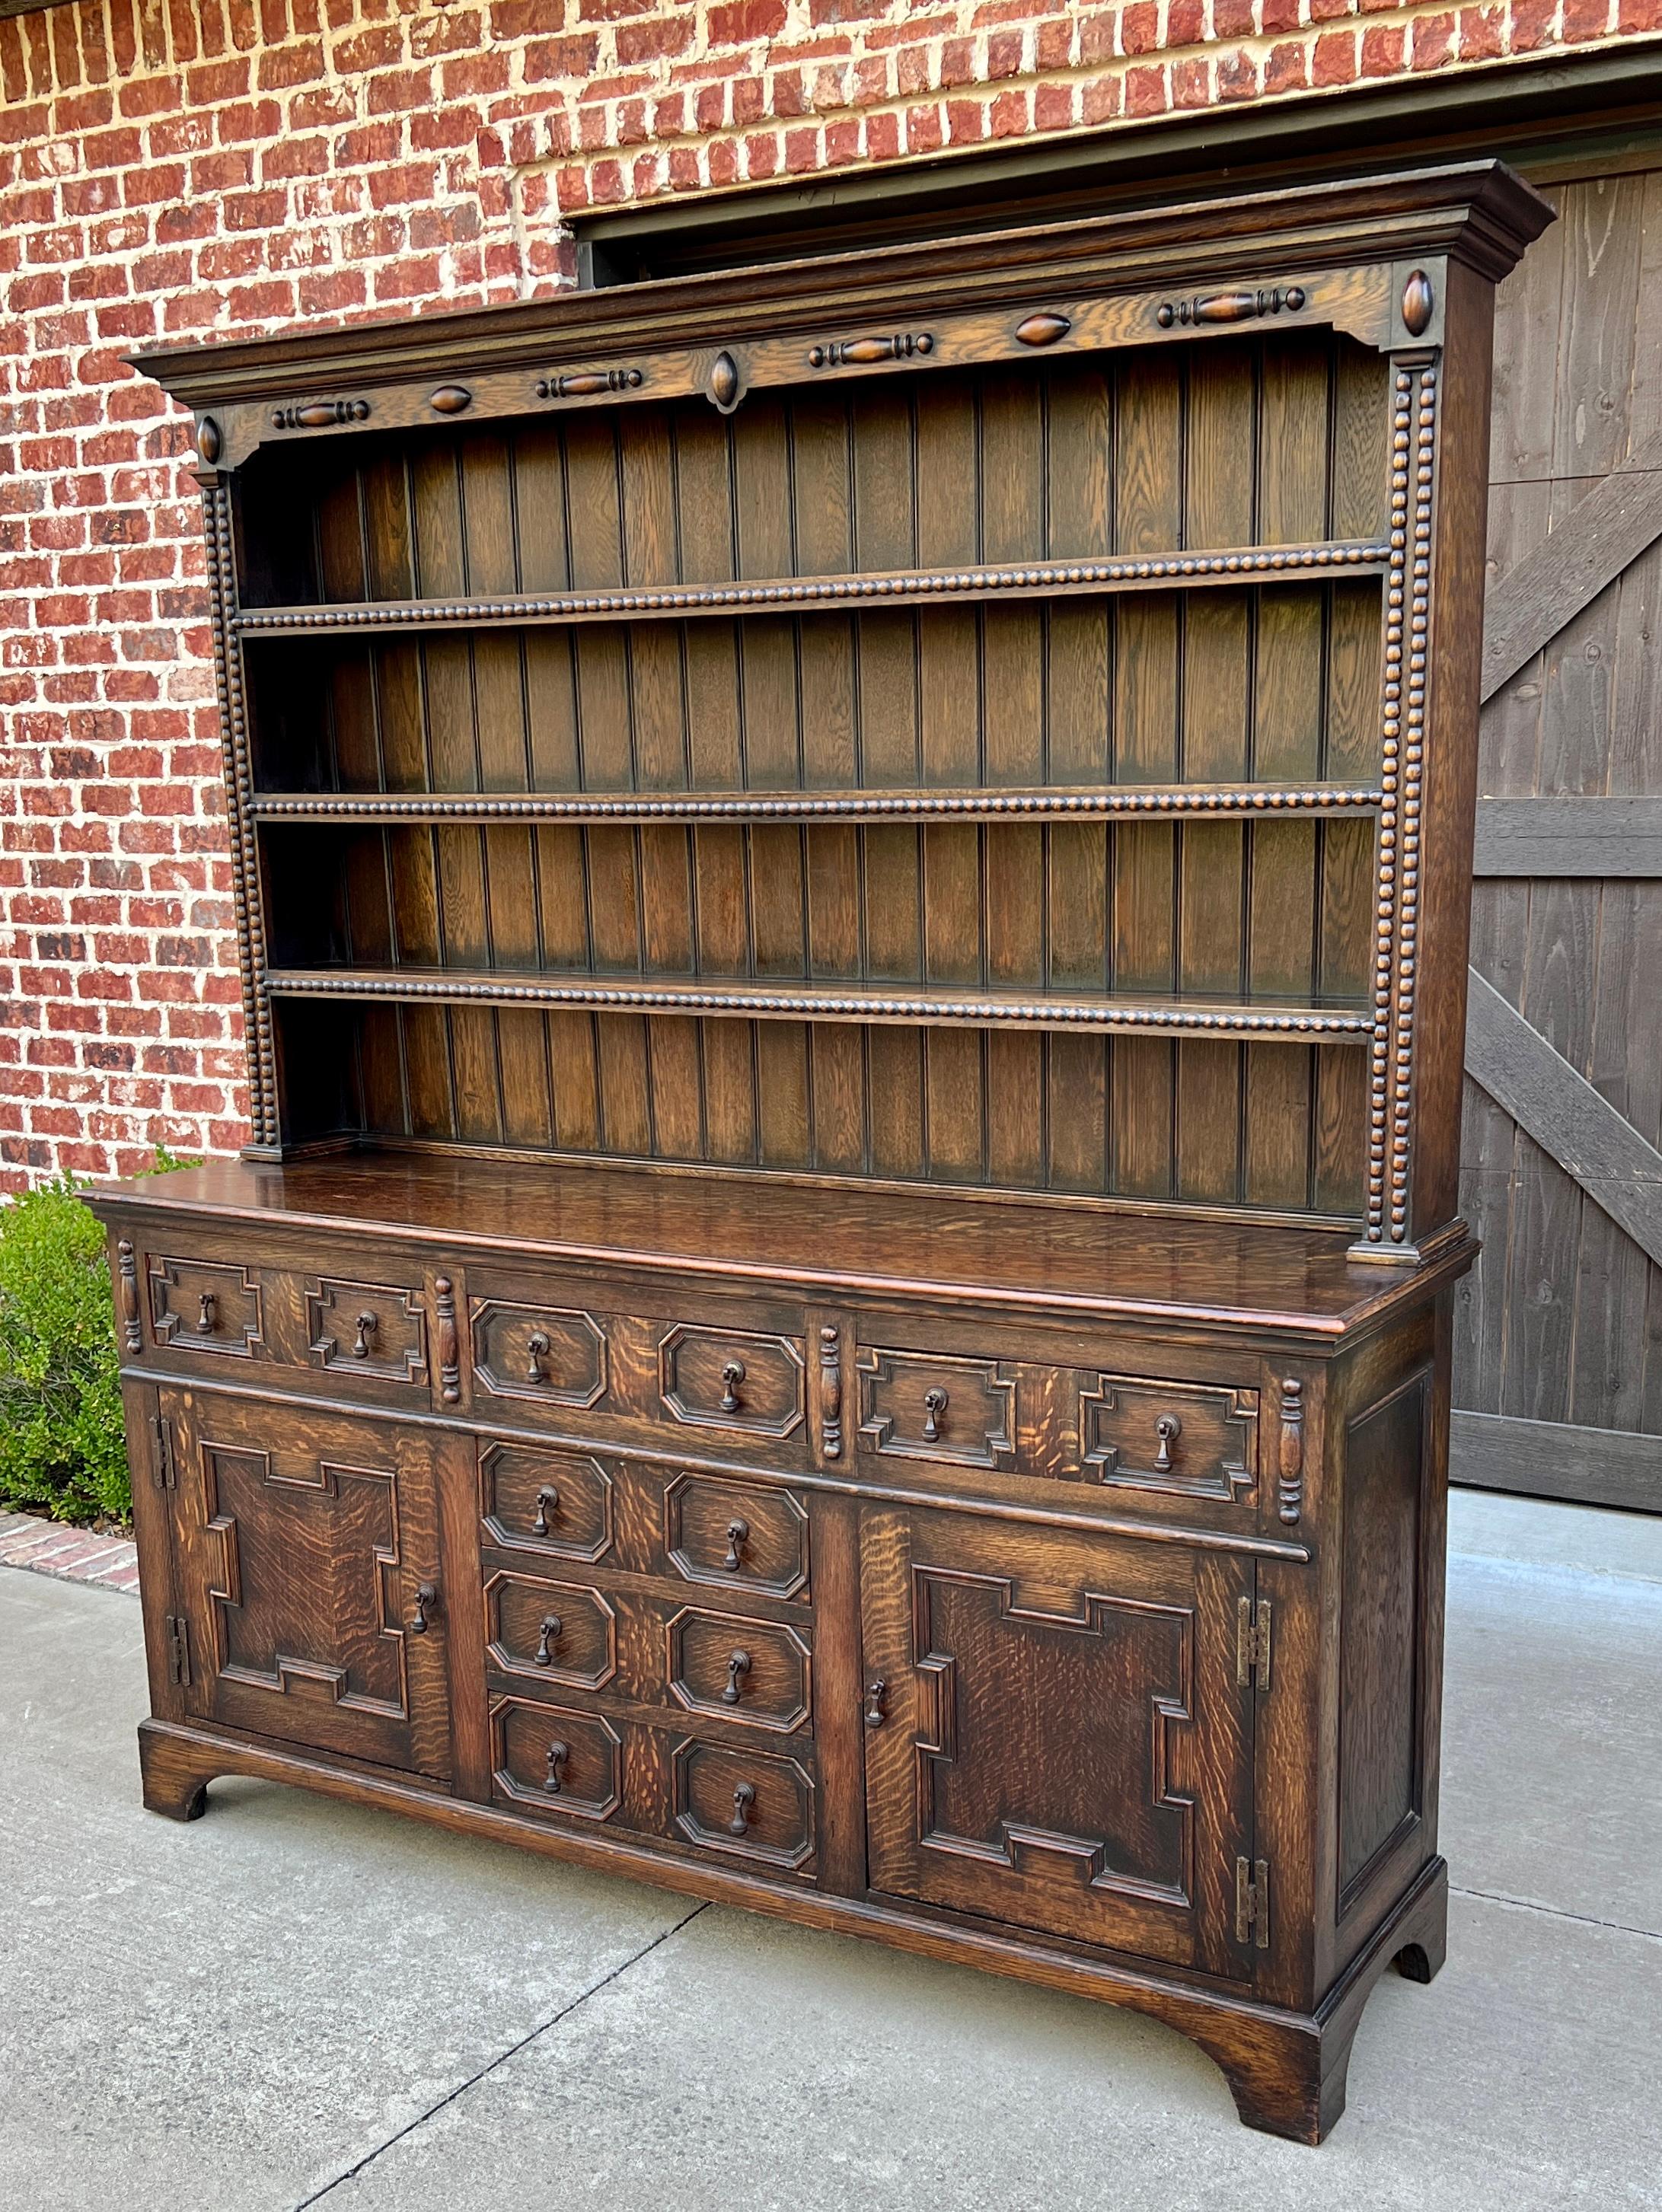     Charming LARGE Antique English Oak Jacobean Welsh Plate Dresser, Sideboard, Hutch Cabinet, Server or Buffet c. 1900-1910

    These pieces, commonly known as 